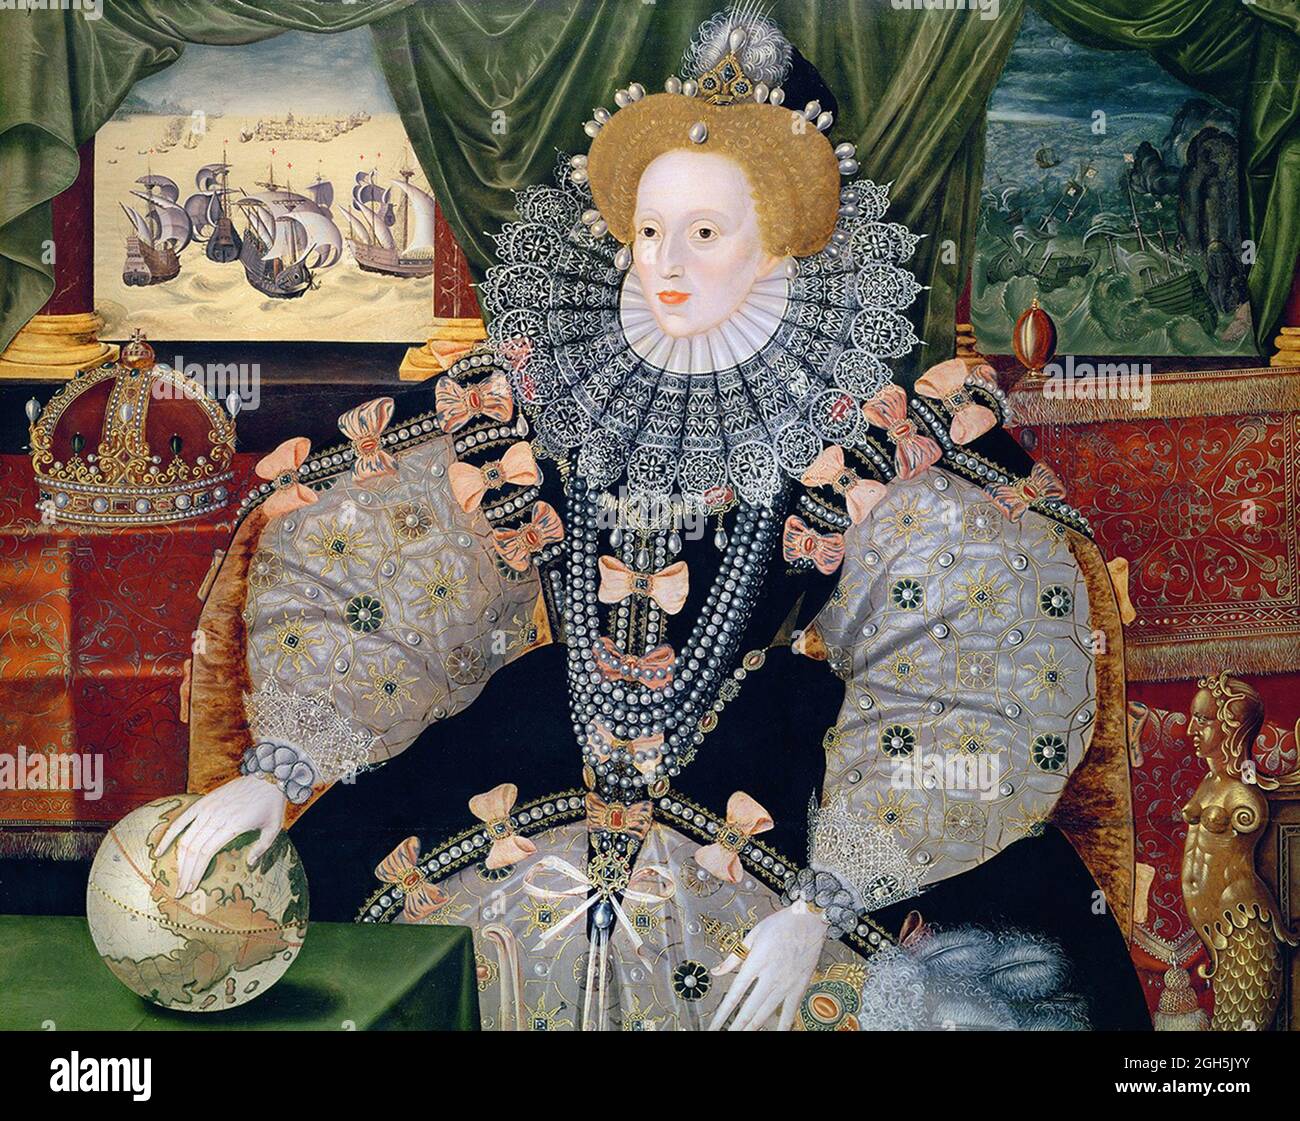 The 'Armada Portrait' of Queen Elizabeth I who was Queen of England from 1558 until 1603. This painting commemorates the defeat of the Spanish Armada, depicted in the background. Elizabeth's hand rests on the globe, symbolising her international power. Stock Photo